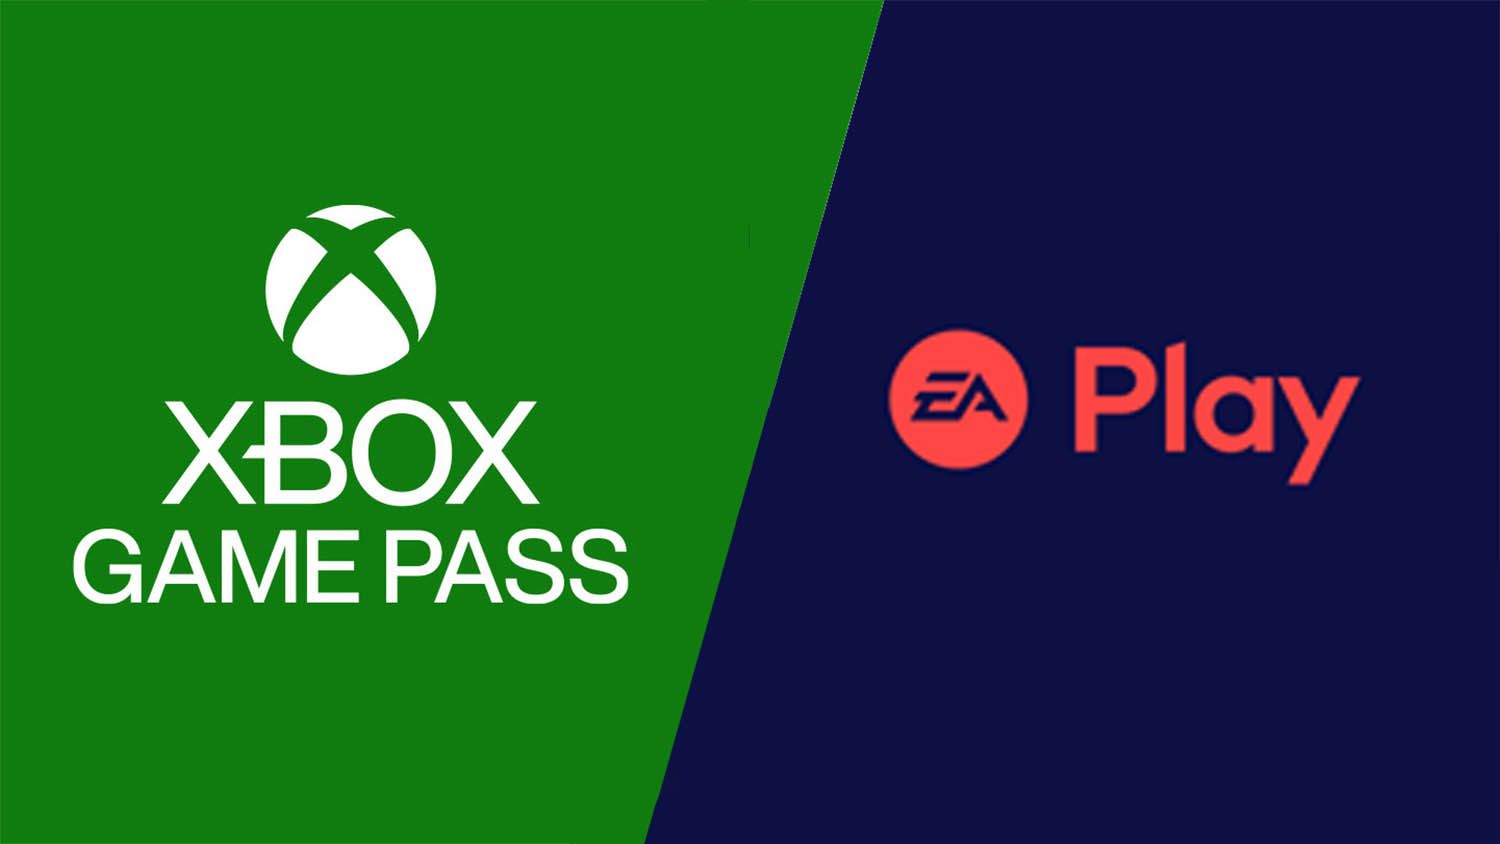 The Entire EA Play Catalog Is Now Available On Xbox Game Pass